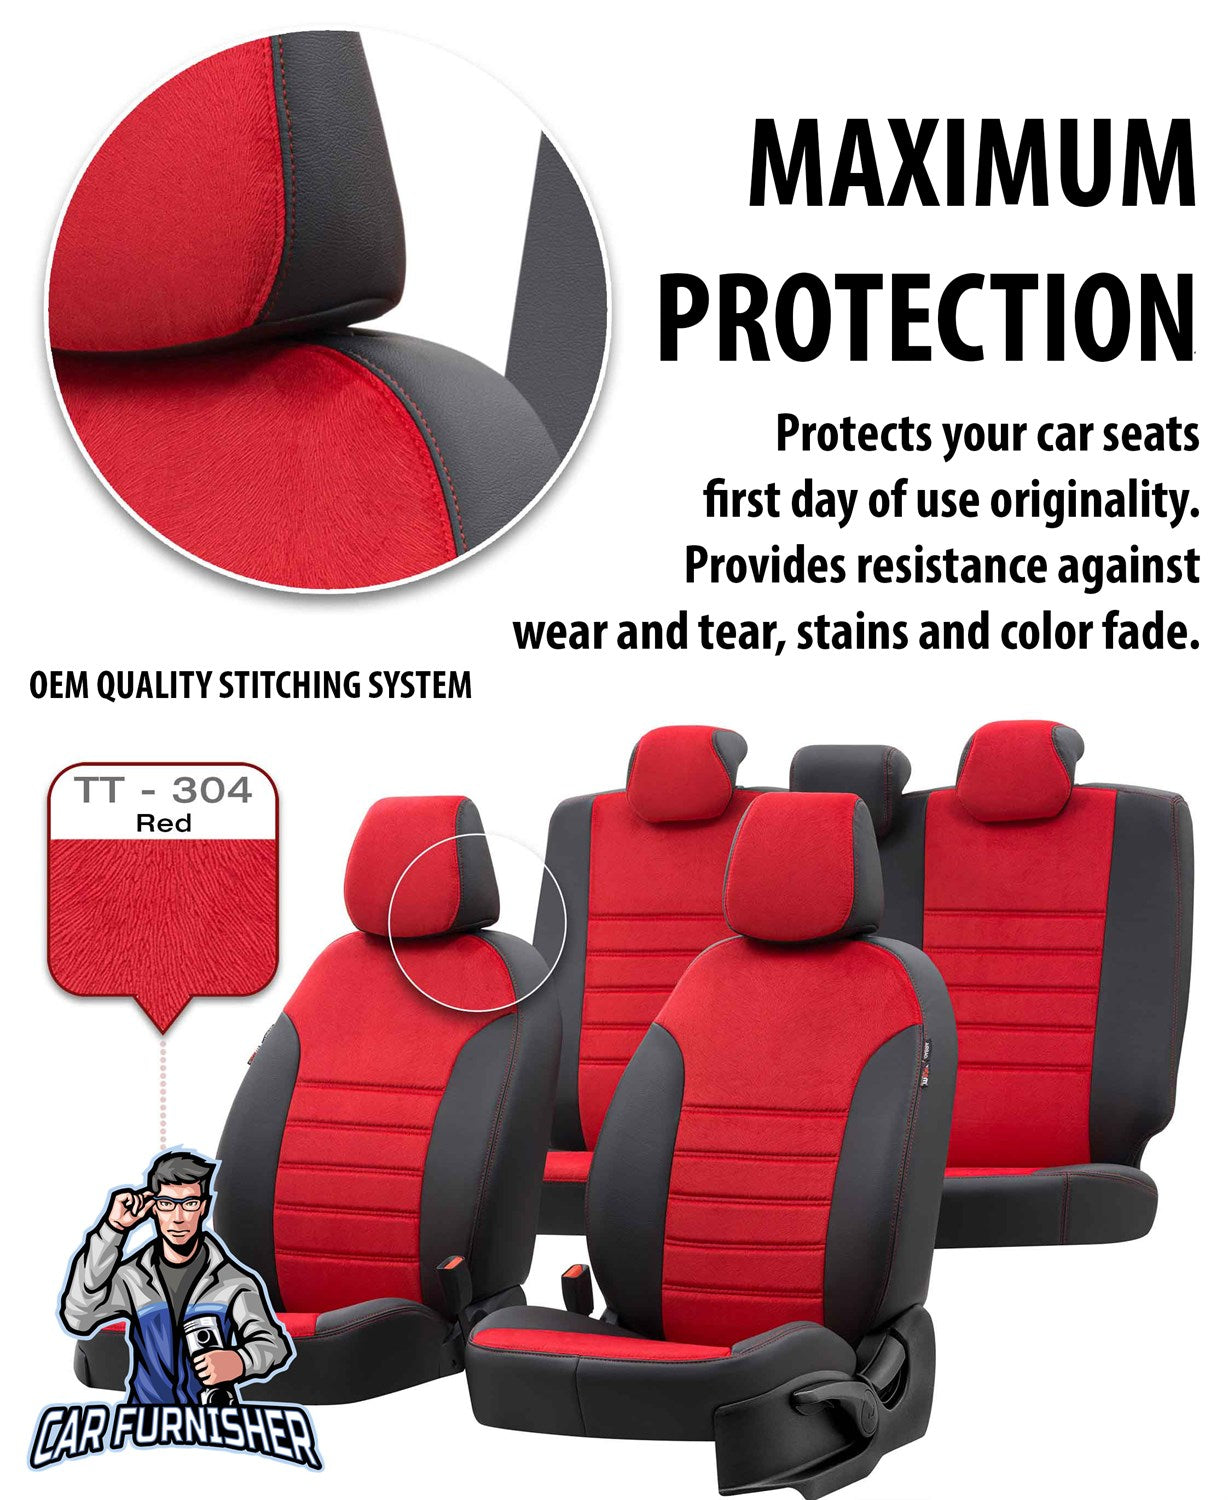 Audi A1 Car Seat Cover 2011-2016 Custom Made London Design Smoked Full Set (5 Seats + Handrest) Leather & Fabric